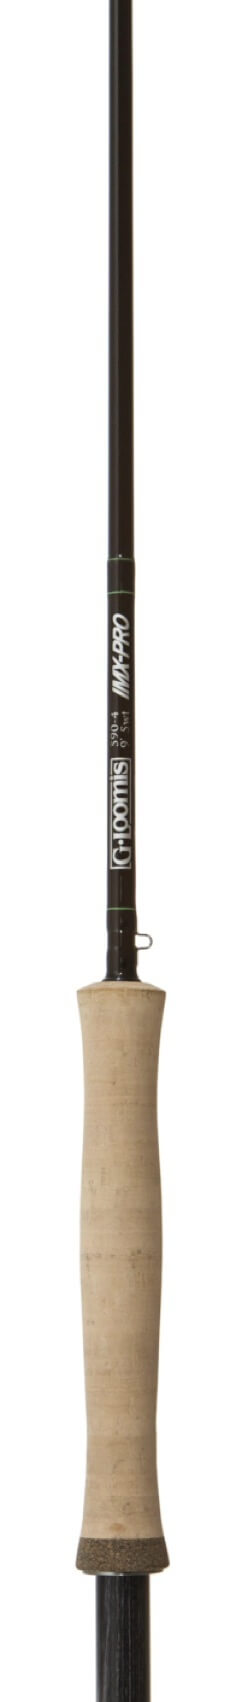 G. Loomis GLX Mag Bass Casting Rods - American Legacy Fishing, G